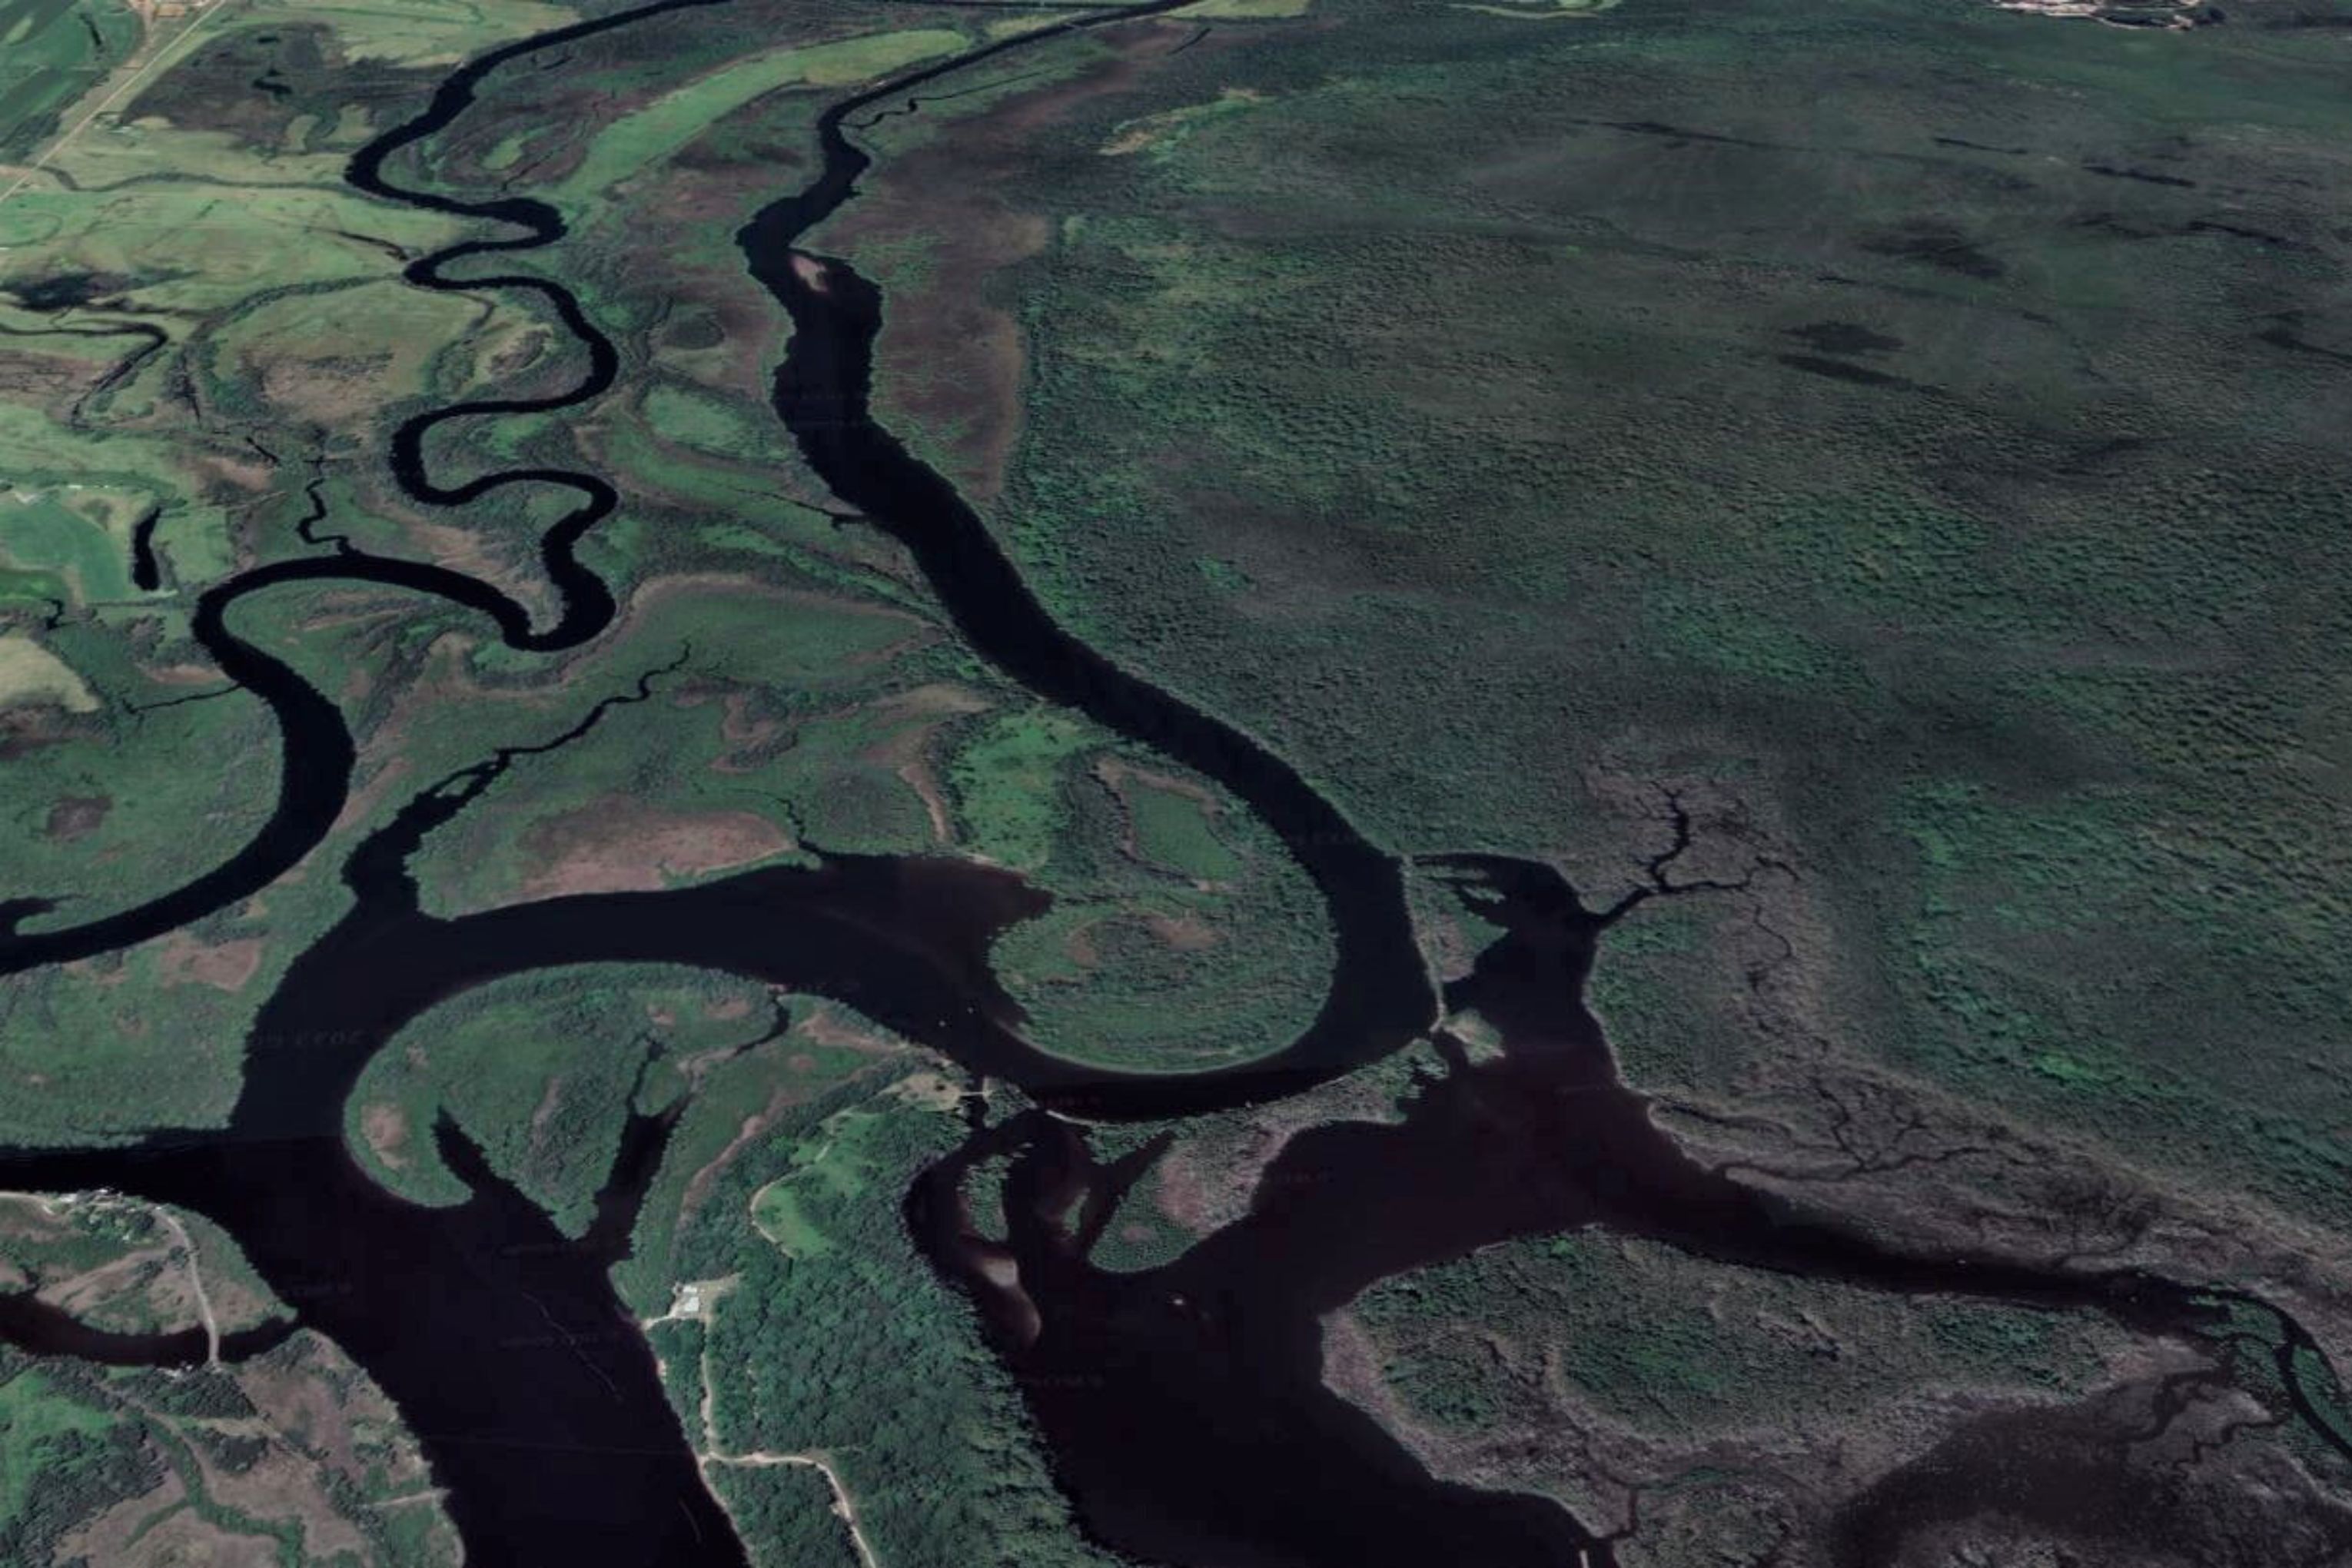 Google Earth image of Wetlands in the Clybucca area